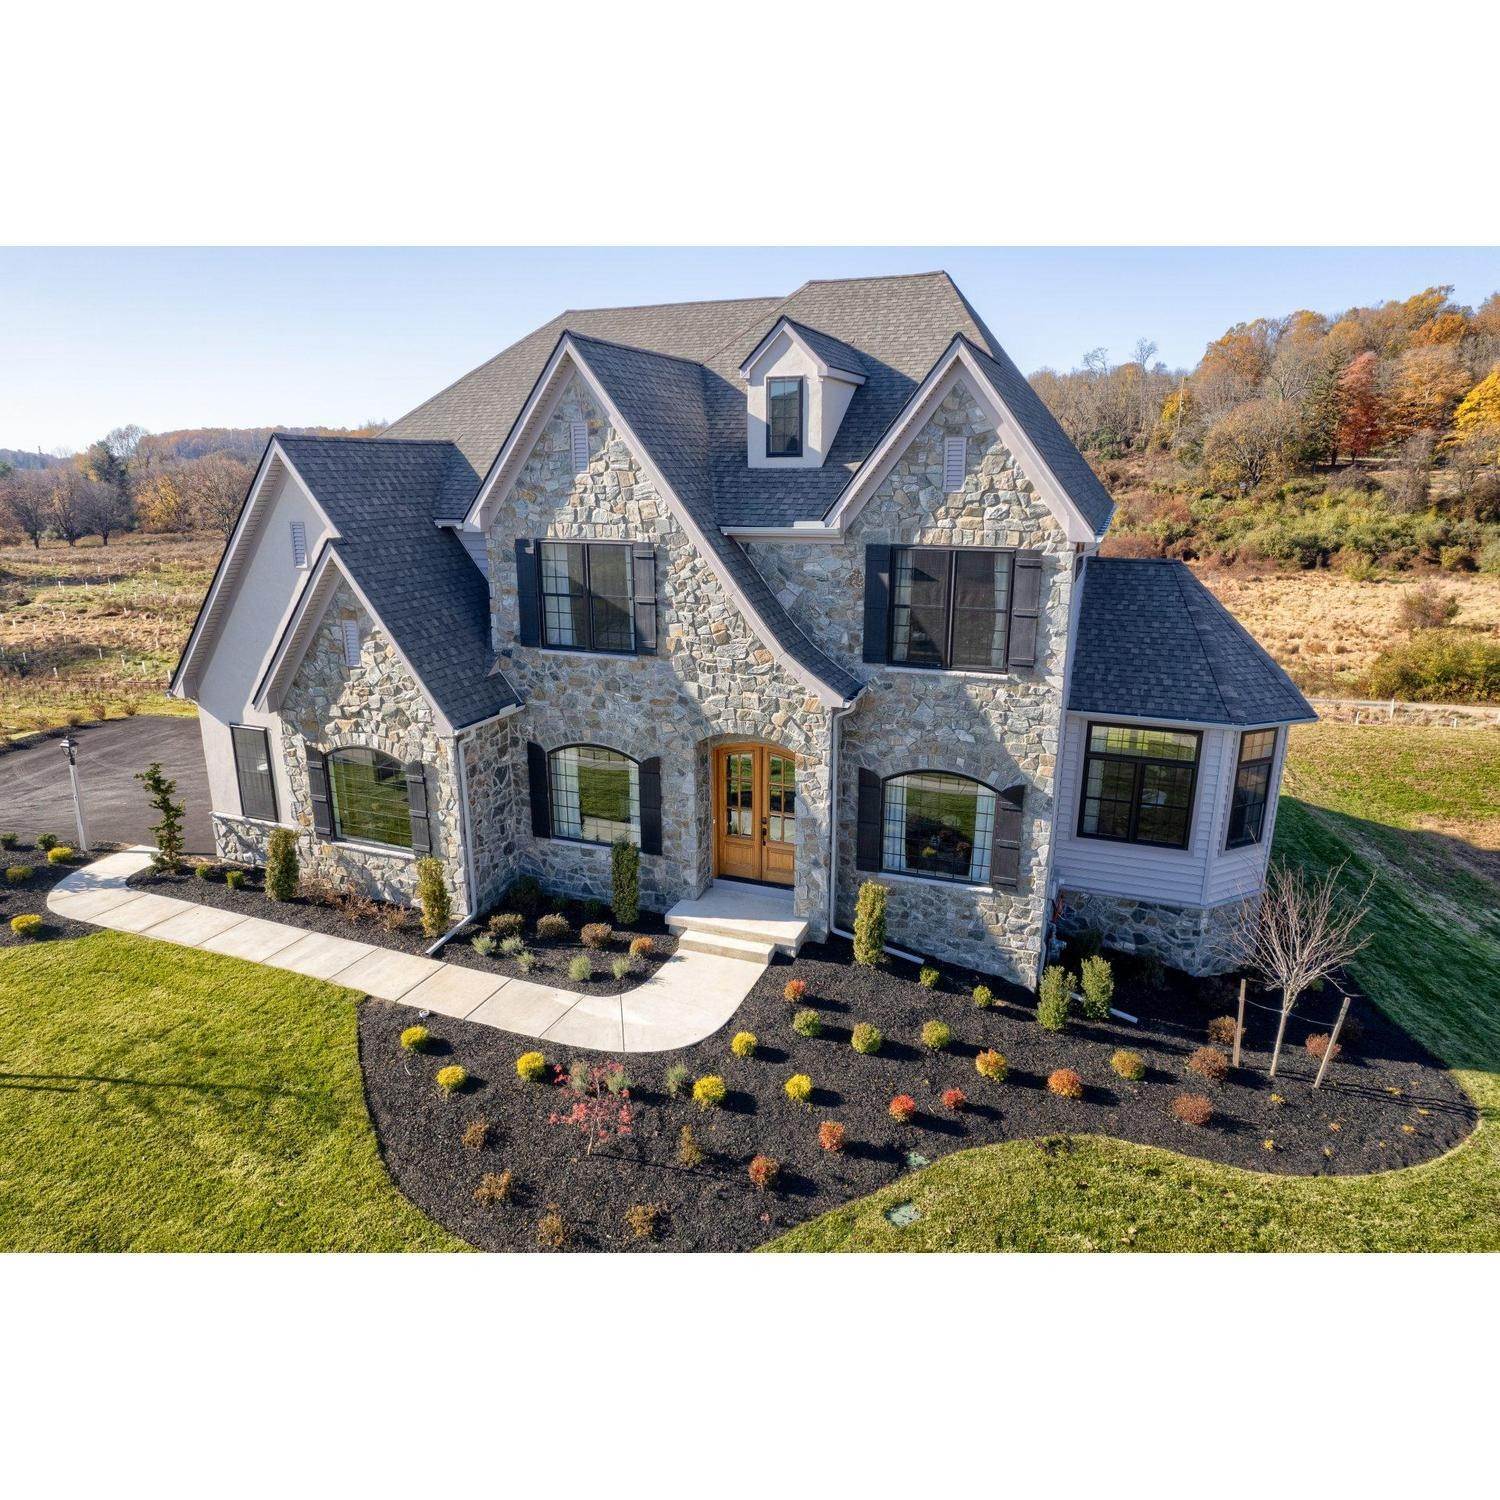 43. Ventry at Edgmont Preserve建於 101 Parkview Way, Newtown Square, PA 19073